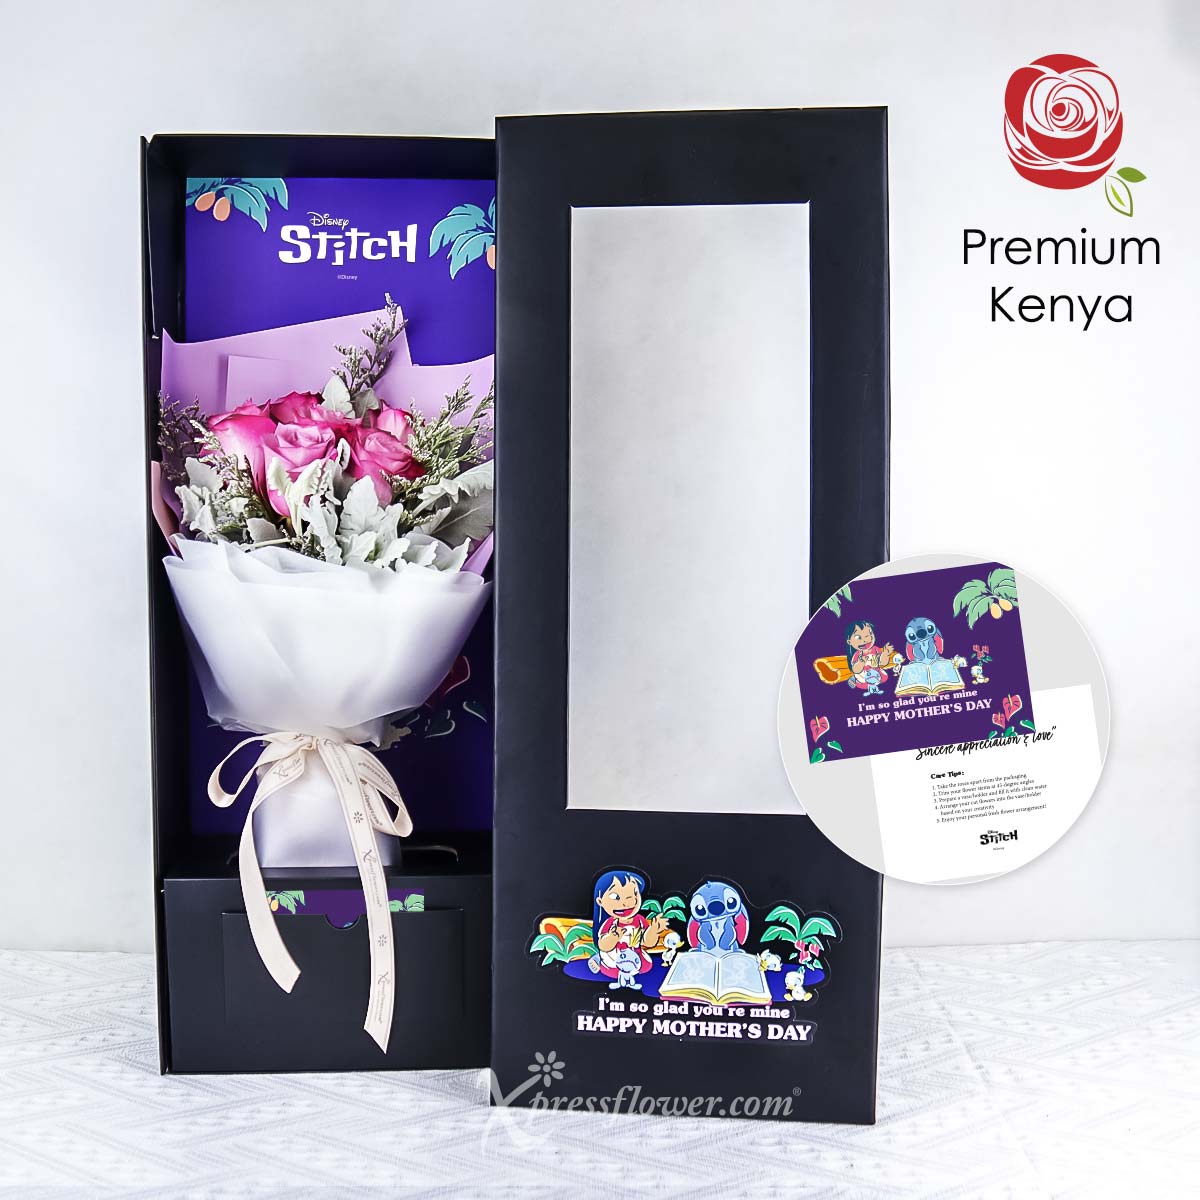 Stitch's Surprise (6 Yam Roses with Disney Stitch "Happy Mother's Day" Bouquet Box)